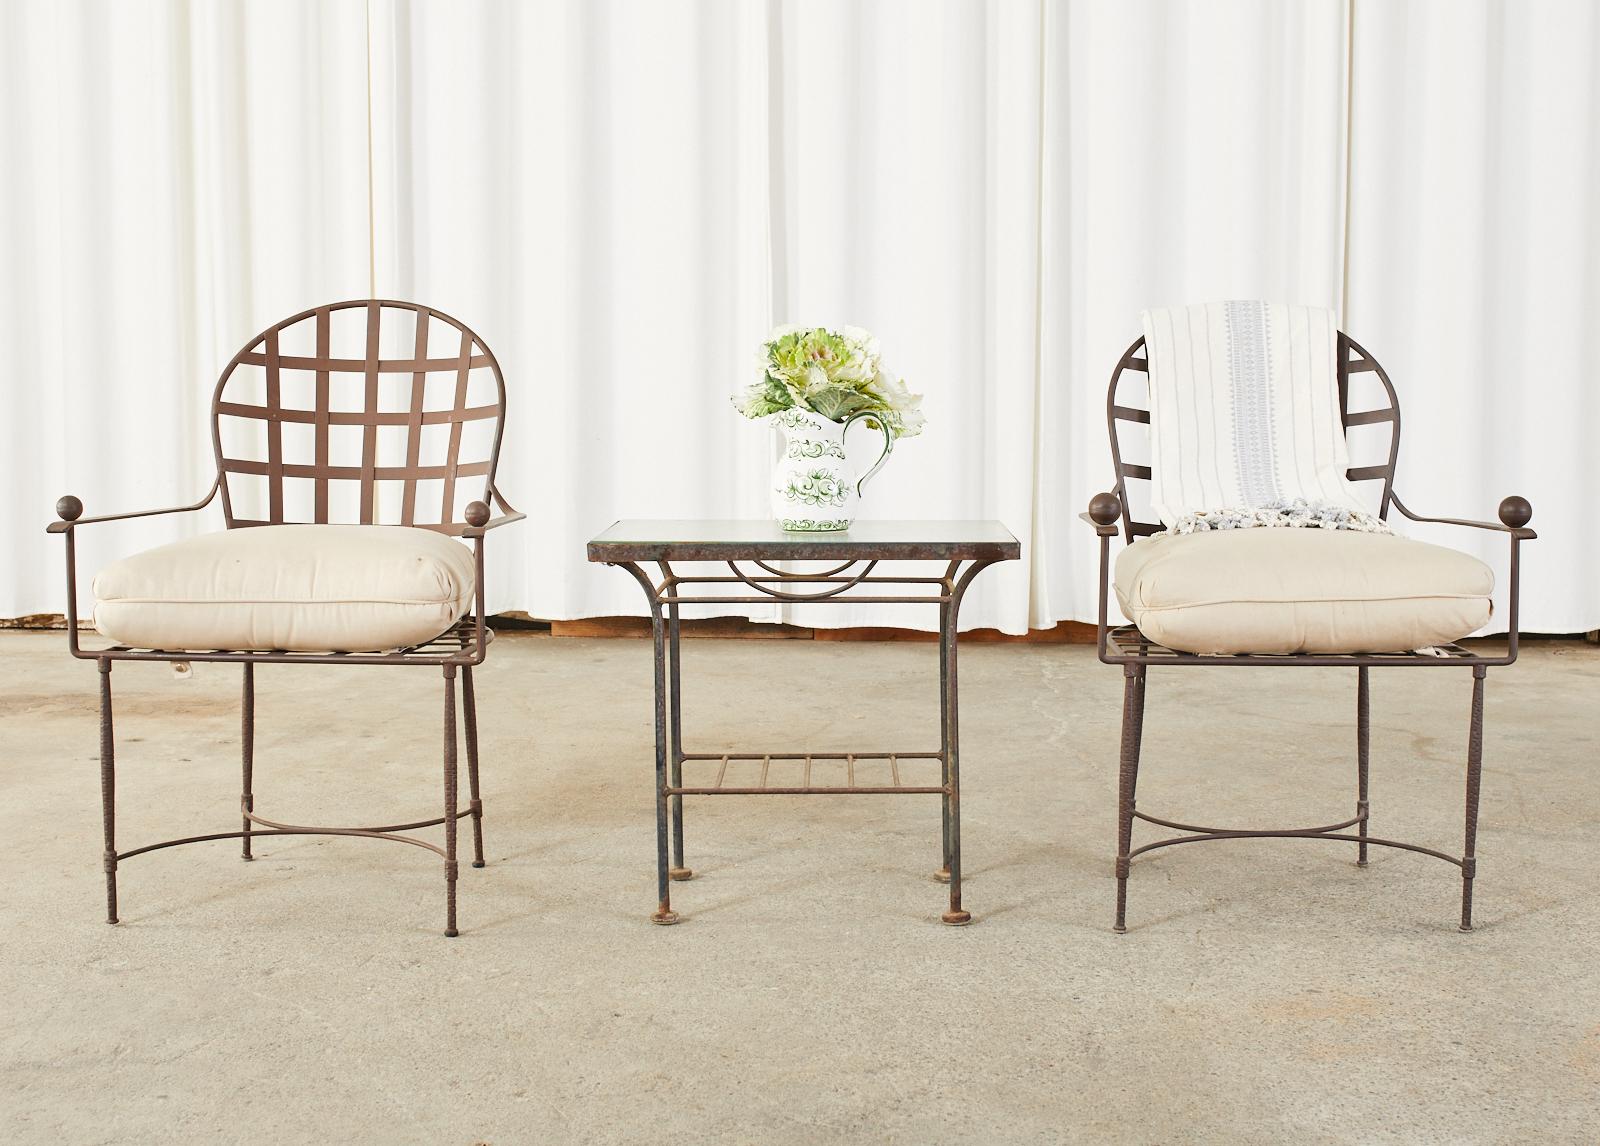 Iconic set of six iron patio and garden dining armchairs designed by Mario Papperzini for John Salterini. Mid-century modern design features hand-hammered iron frames with a gracefully curved crest rail and flat arms ending with ball finials. The